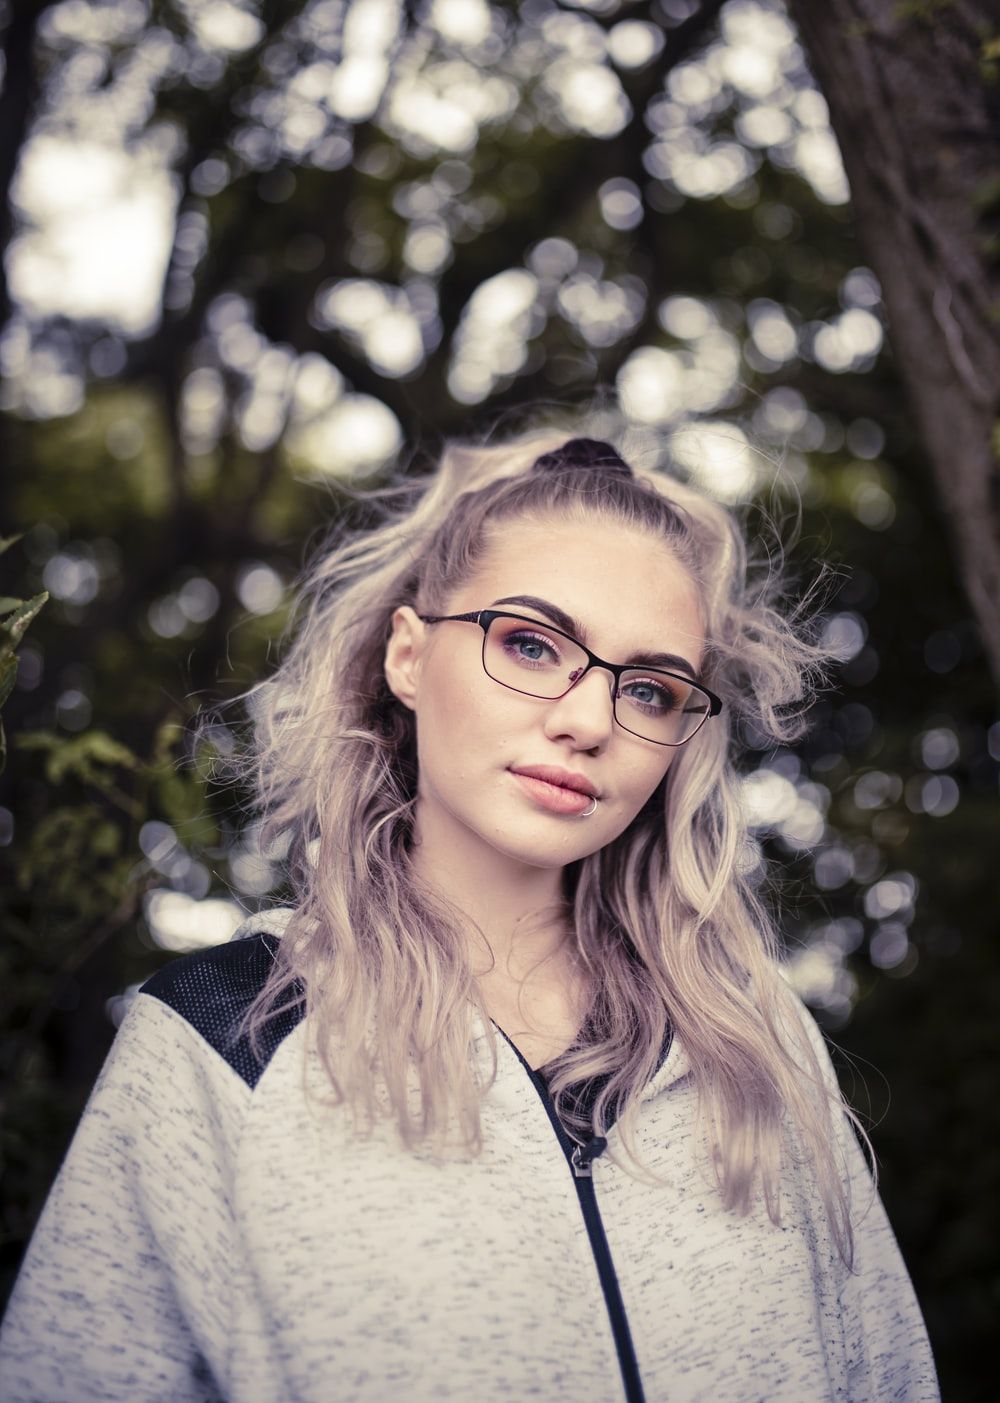 Girl Glasses Picture [HD]. Download Free Image